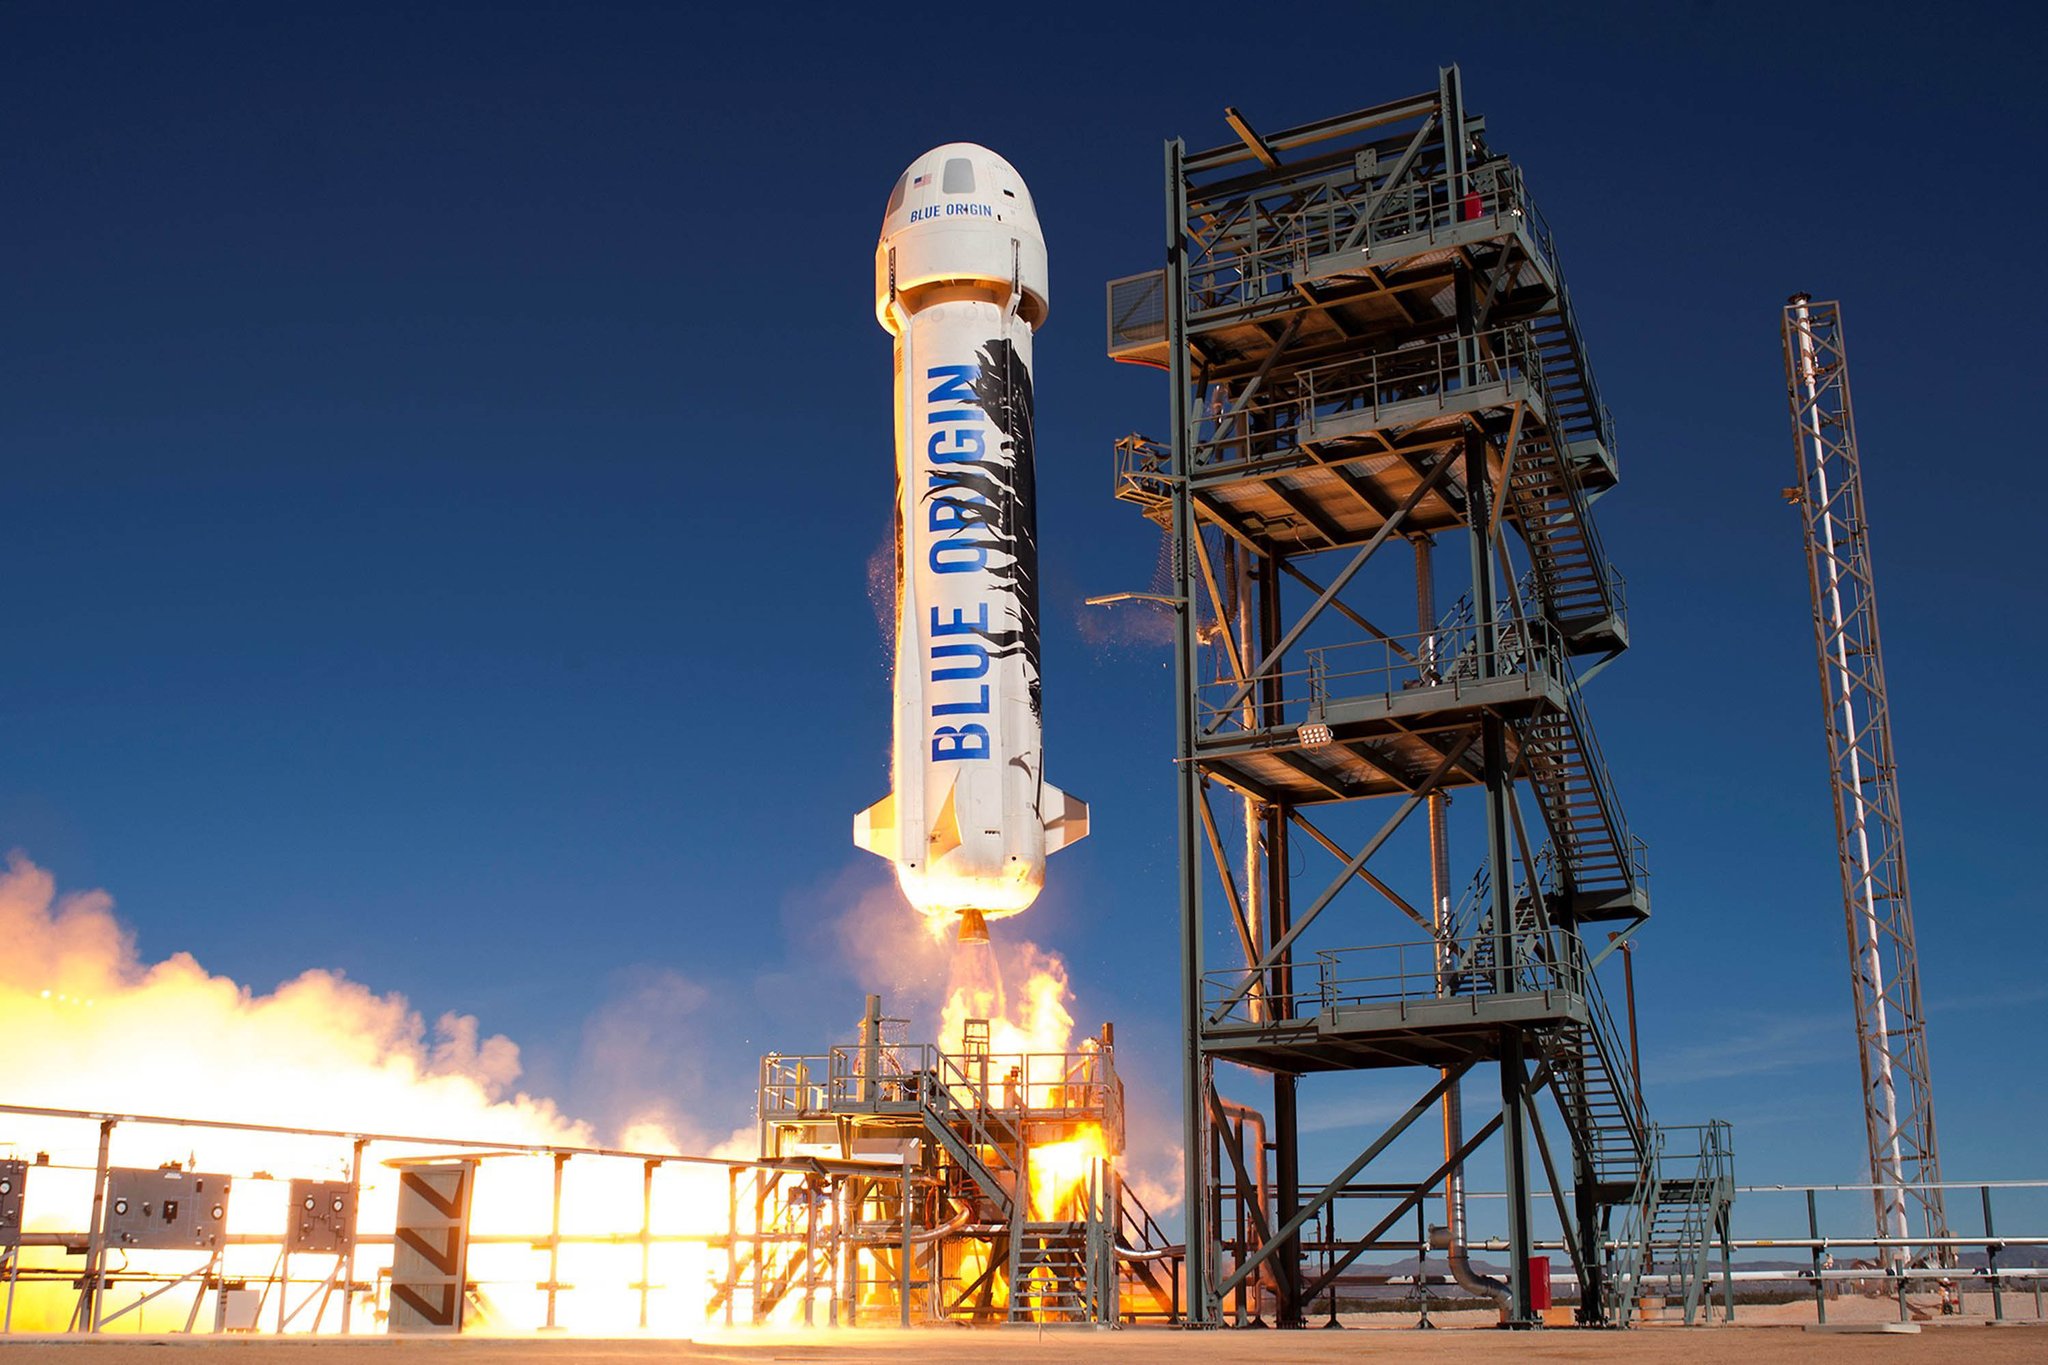 Blue Origin schedule for liftoff on Jan 23, 2019 MAES National Magazine